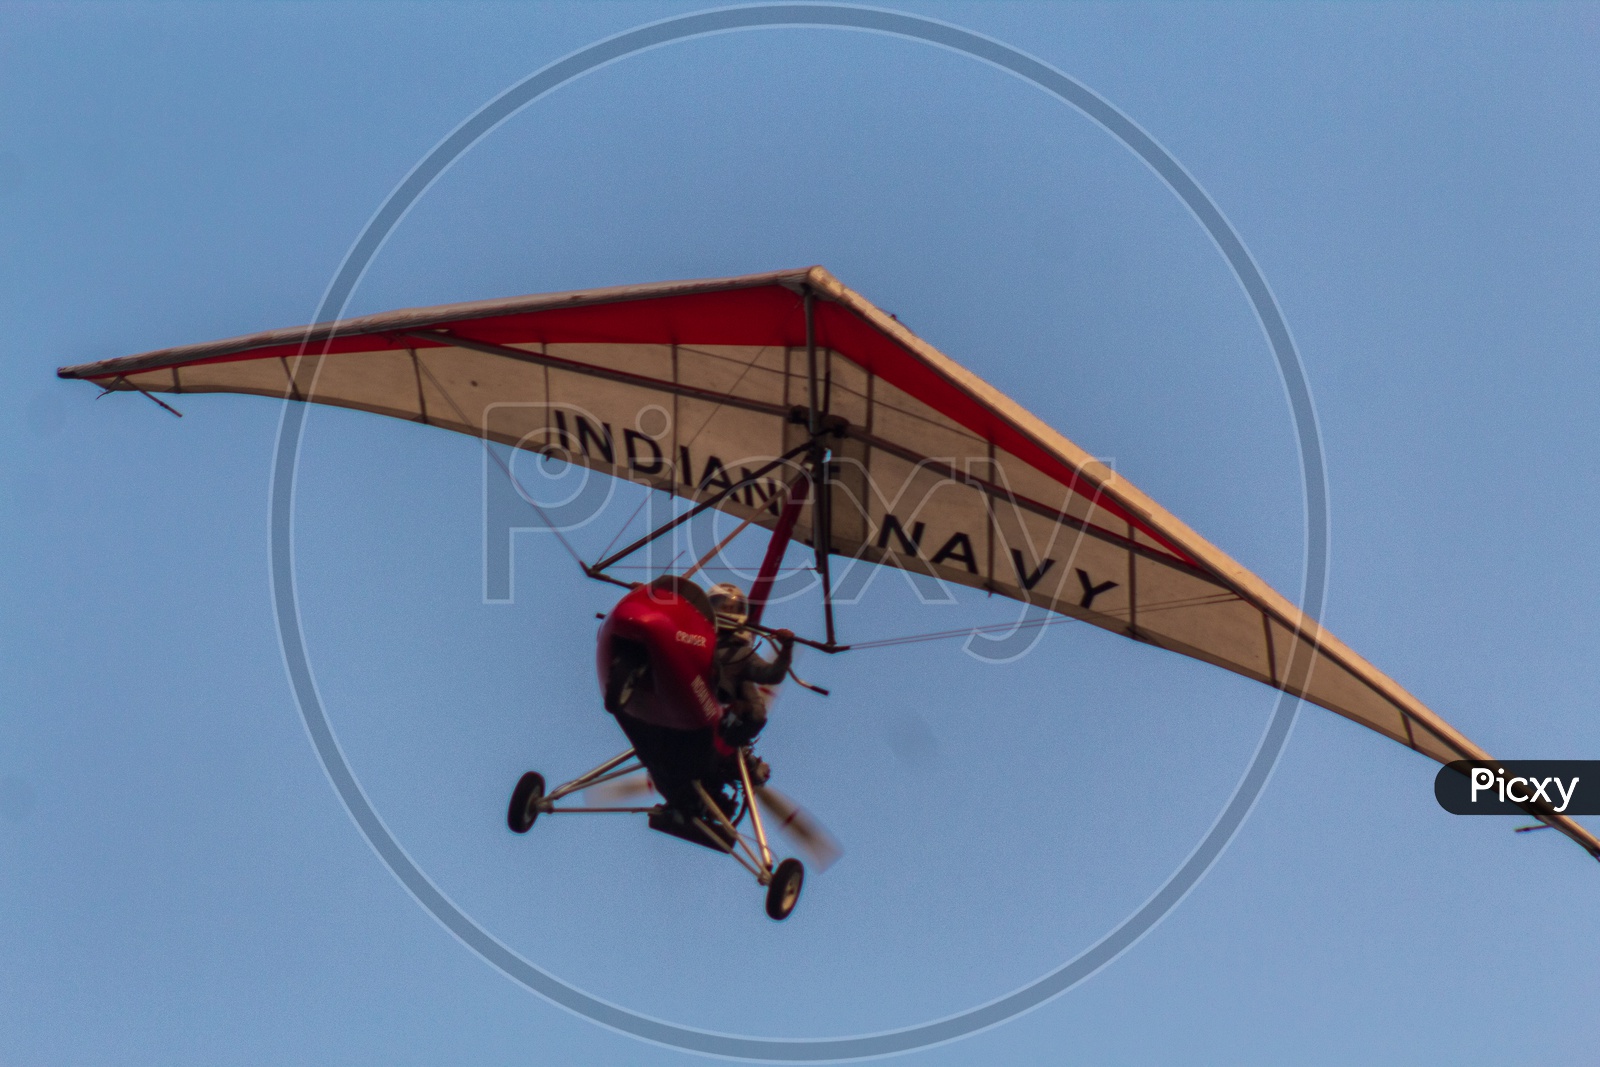 Glider from the Indian Navy at the Navy Day 2019